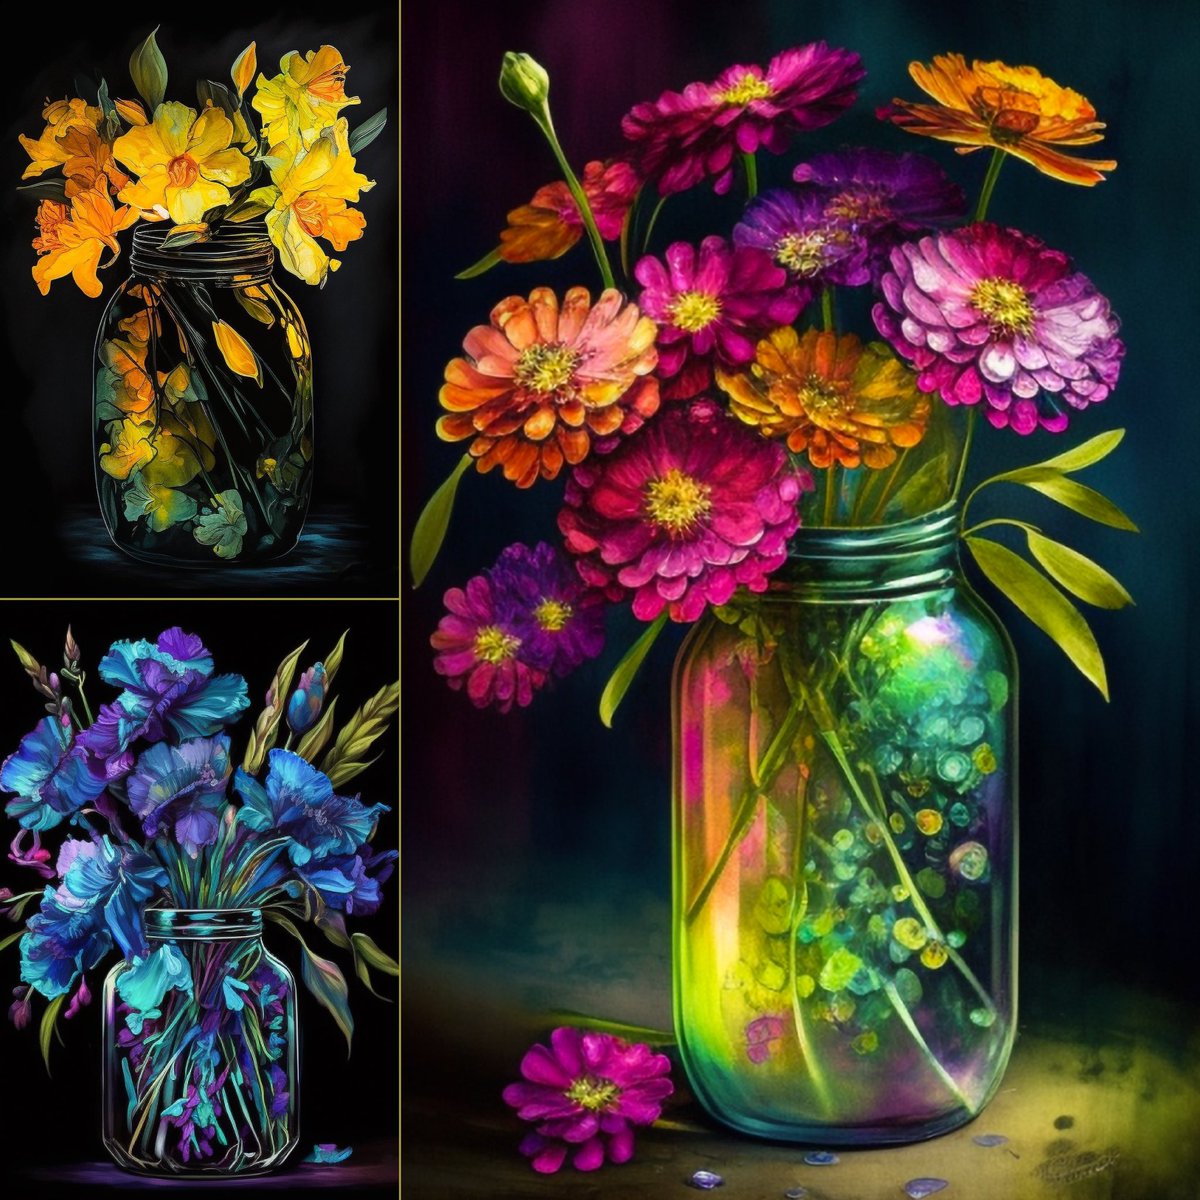 Have you seen my latest Fancy Florals in a Jar? 

#tezos #ai #flowers